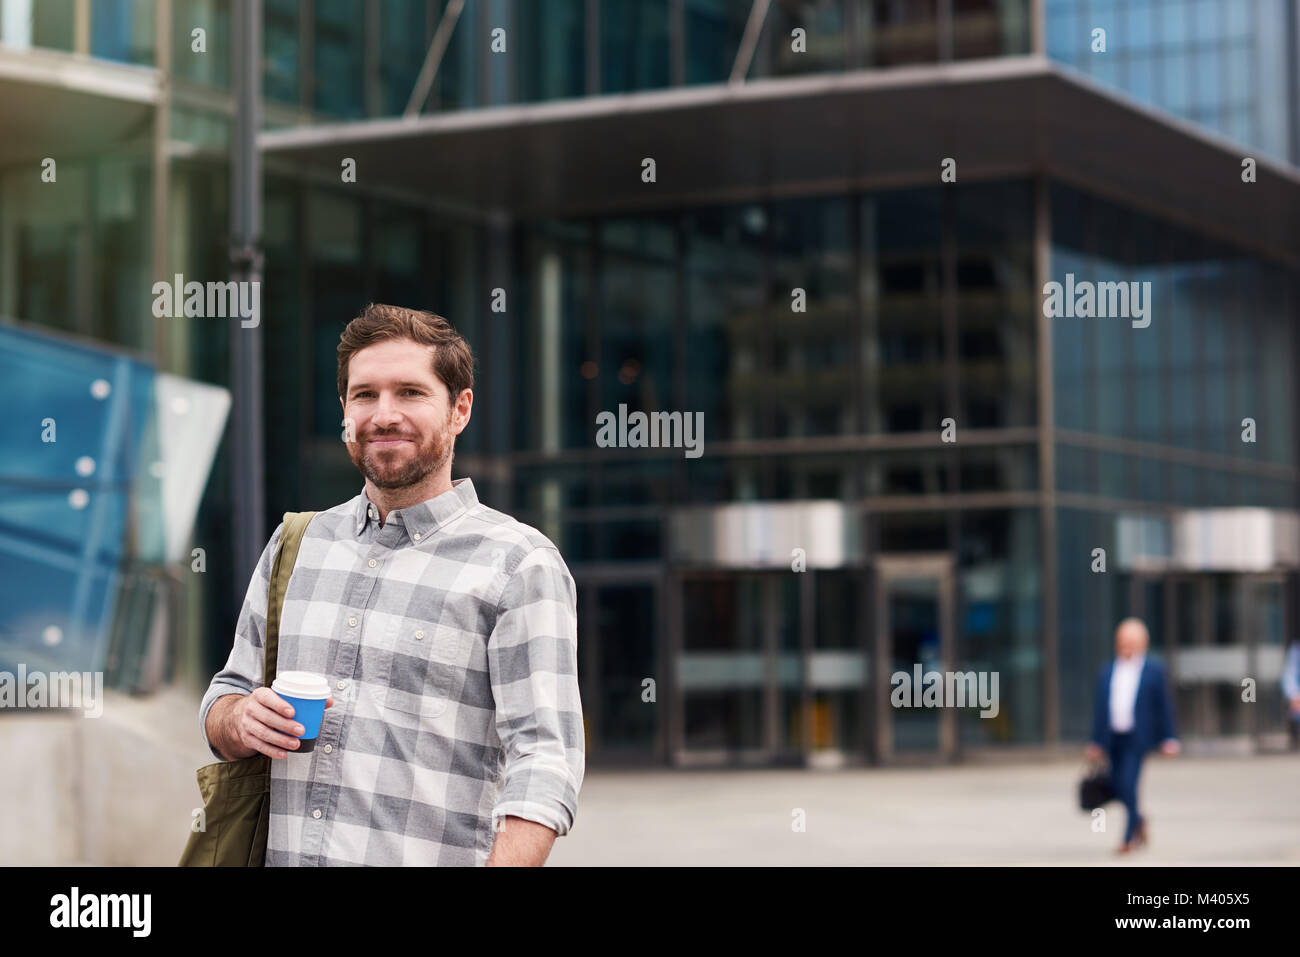 Smiling young man standing in the city drinking coffee   Stock Photo